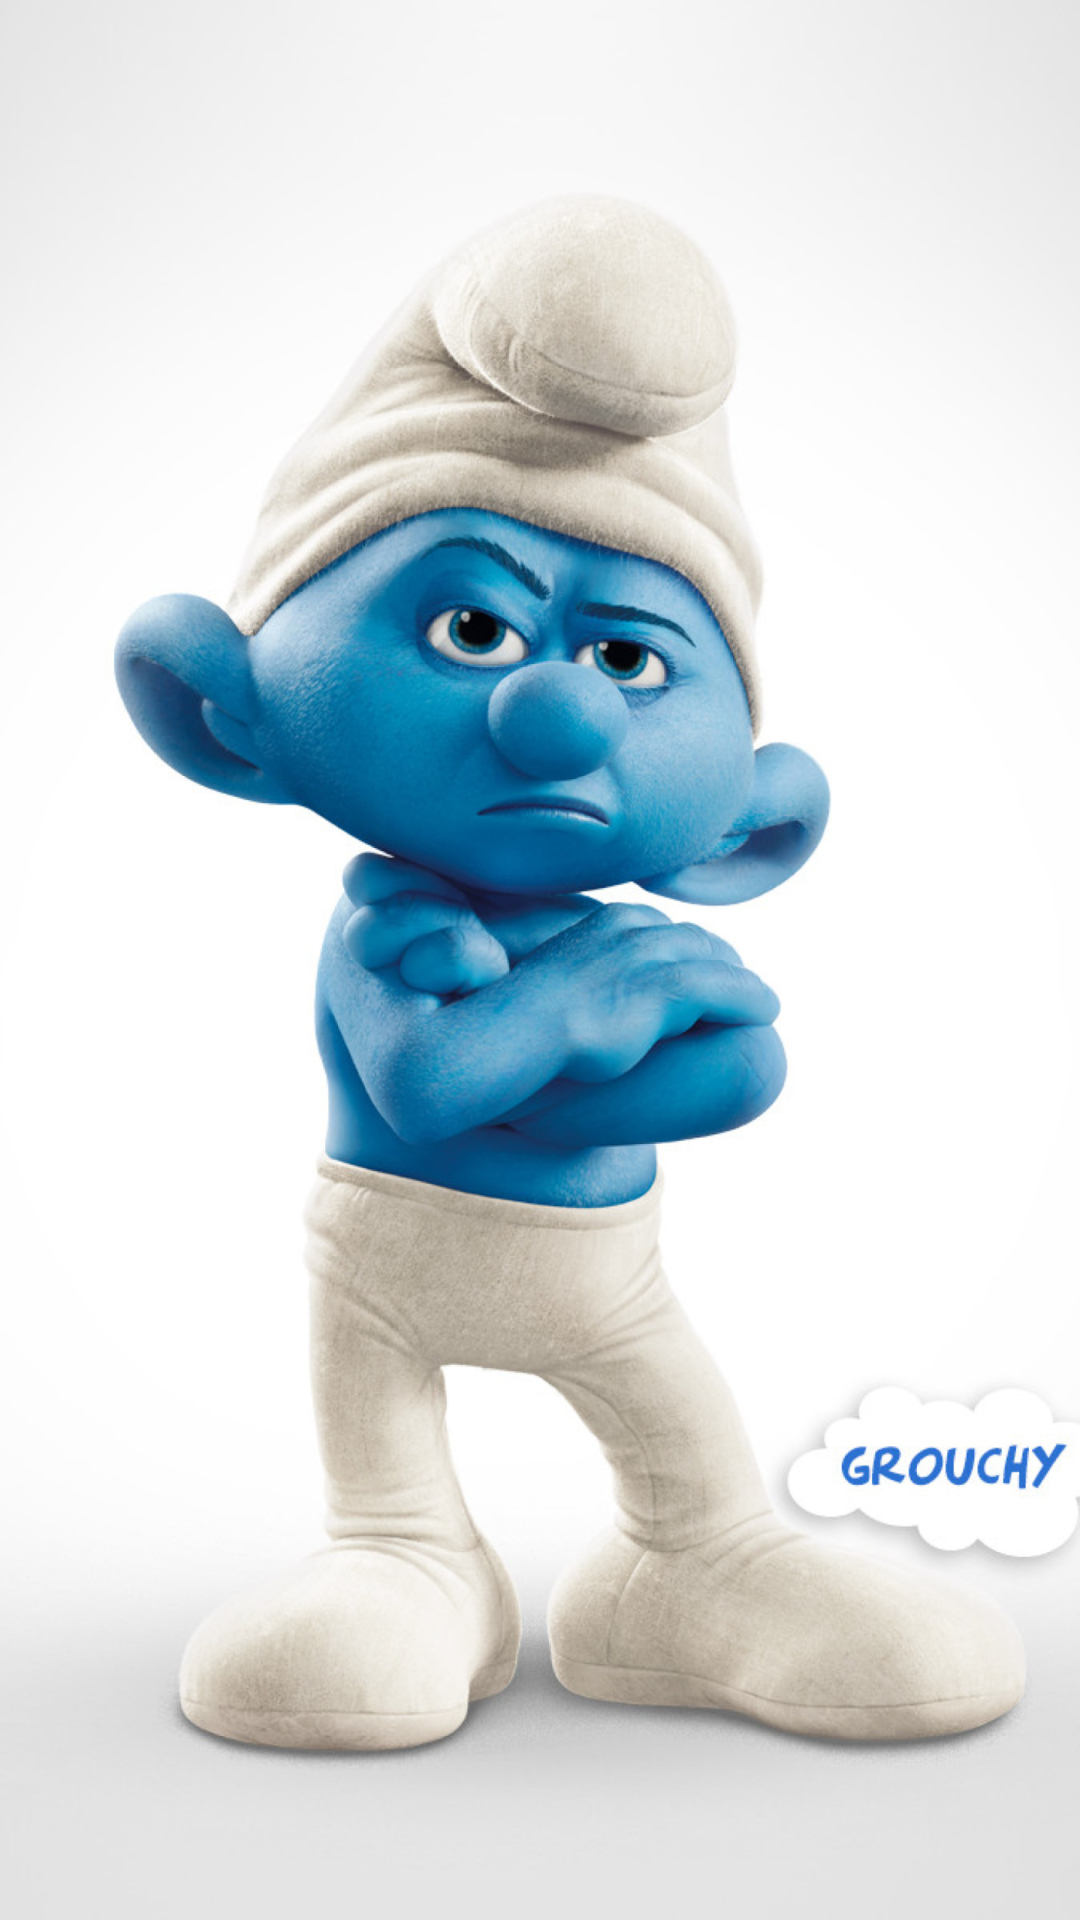 Grouchy The Smurfs 2 wallpaper 1080x1920